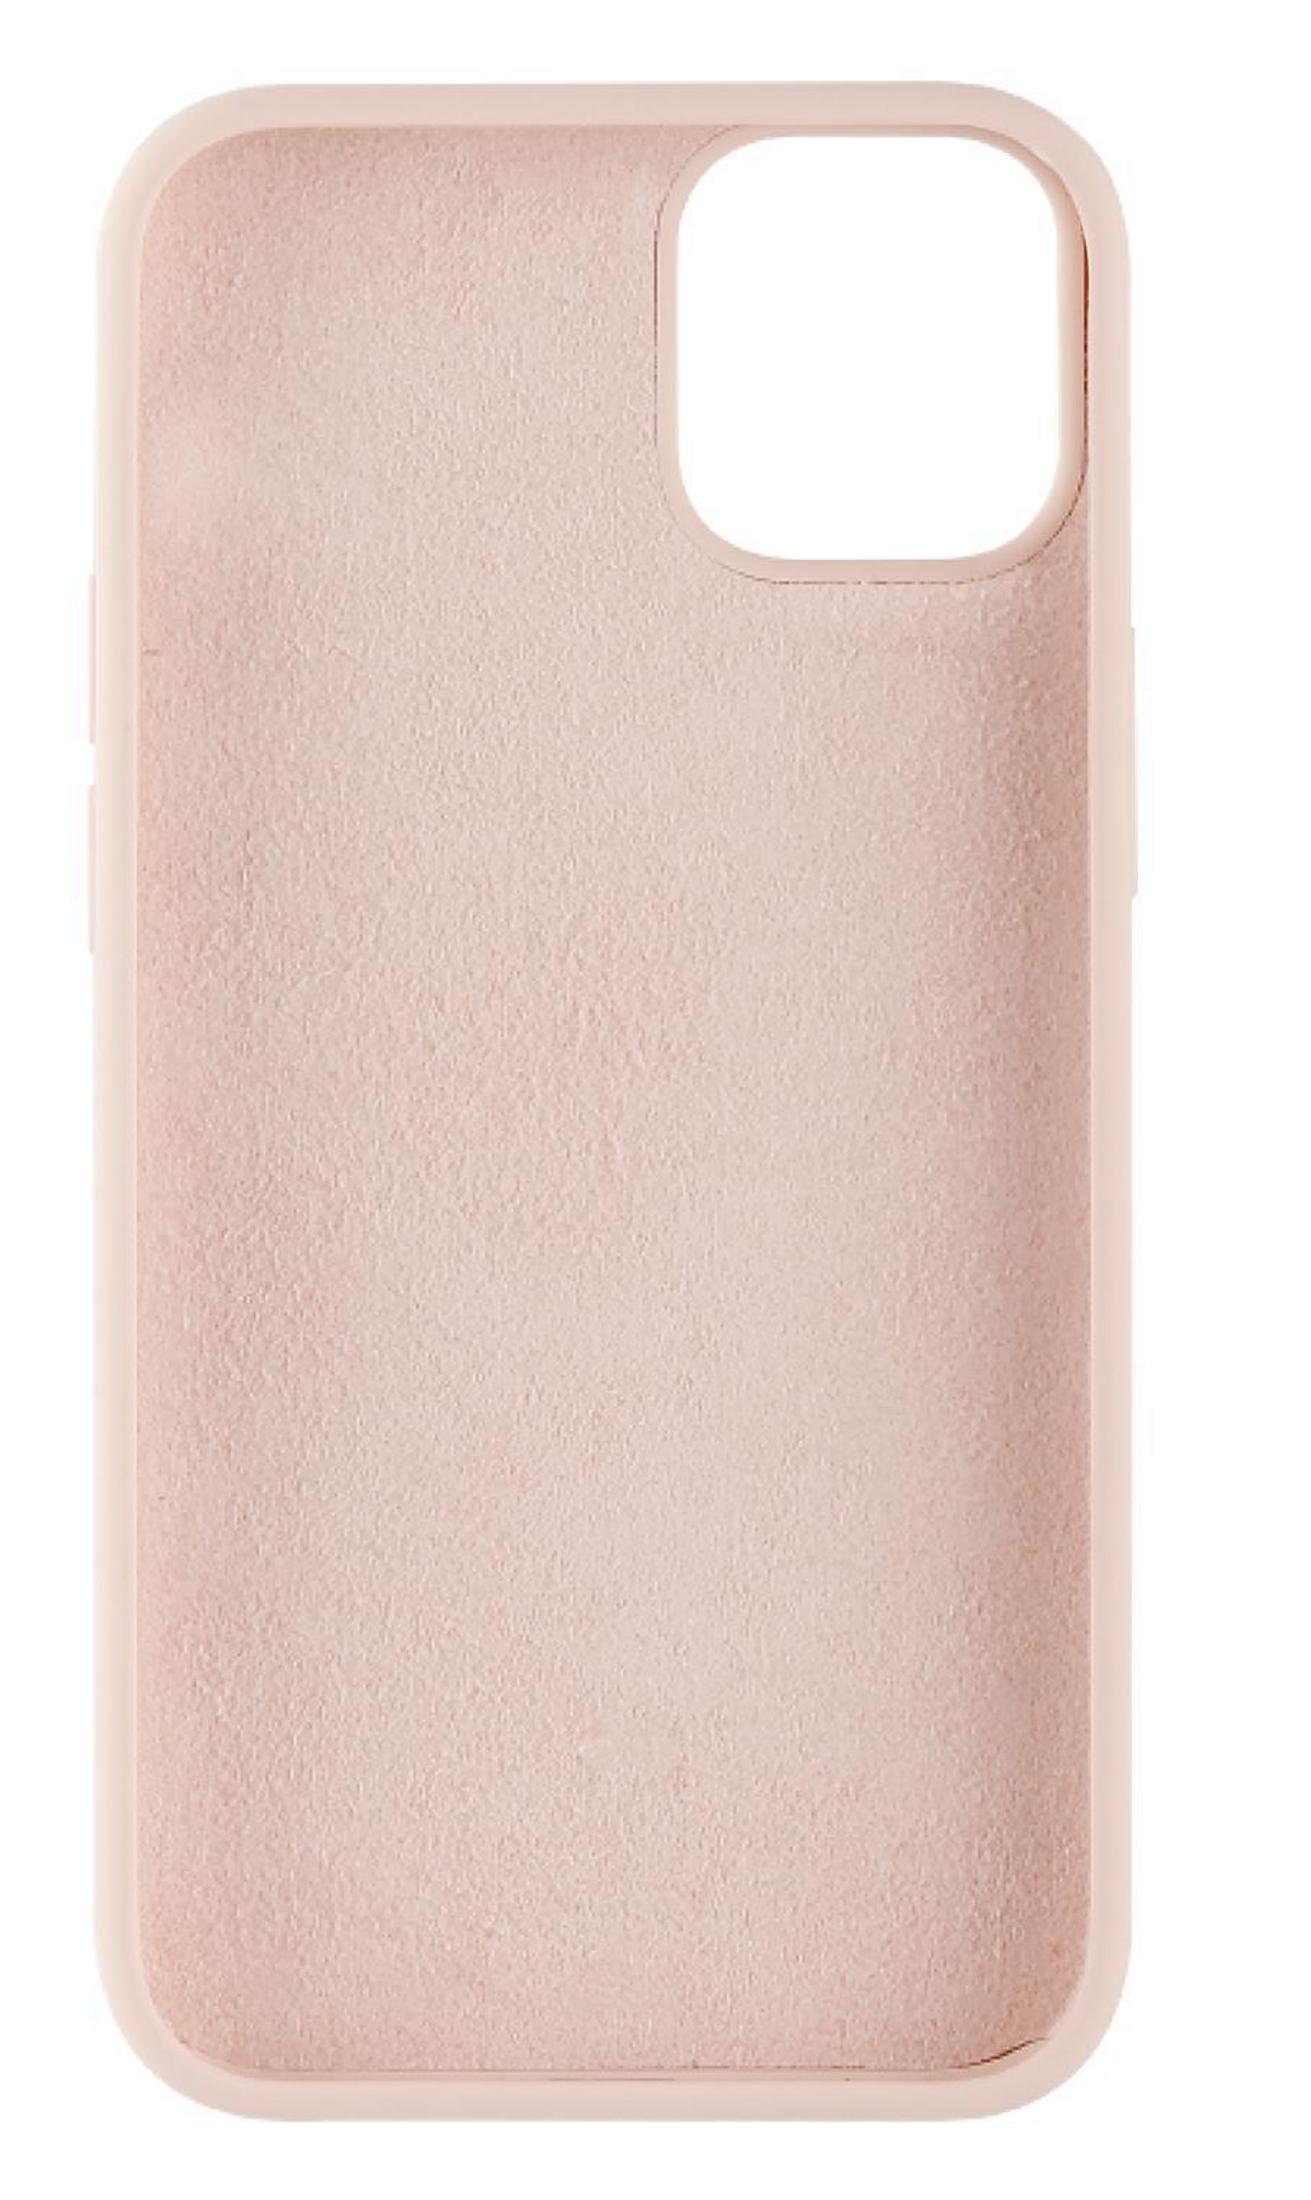 PS, VIVANCO HYPE Pink-Sand iPhone Backcover, COVER Apple, IPH13 13, 62856